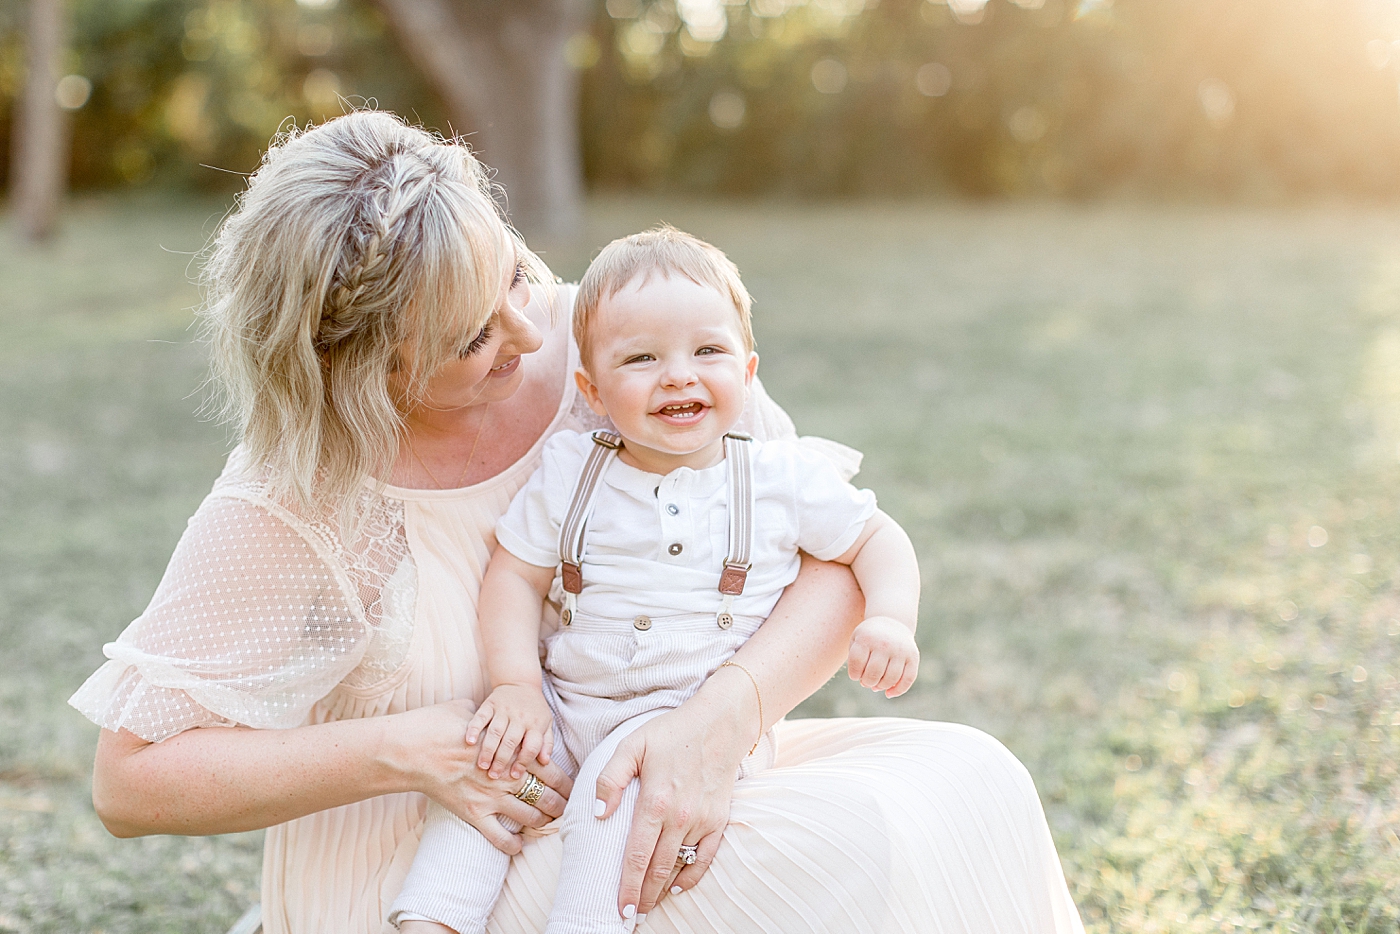 Sunset photoshoot with Mom and her one year old son. Photo by Brittany Elise Photography.